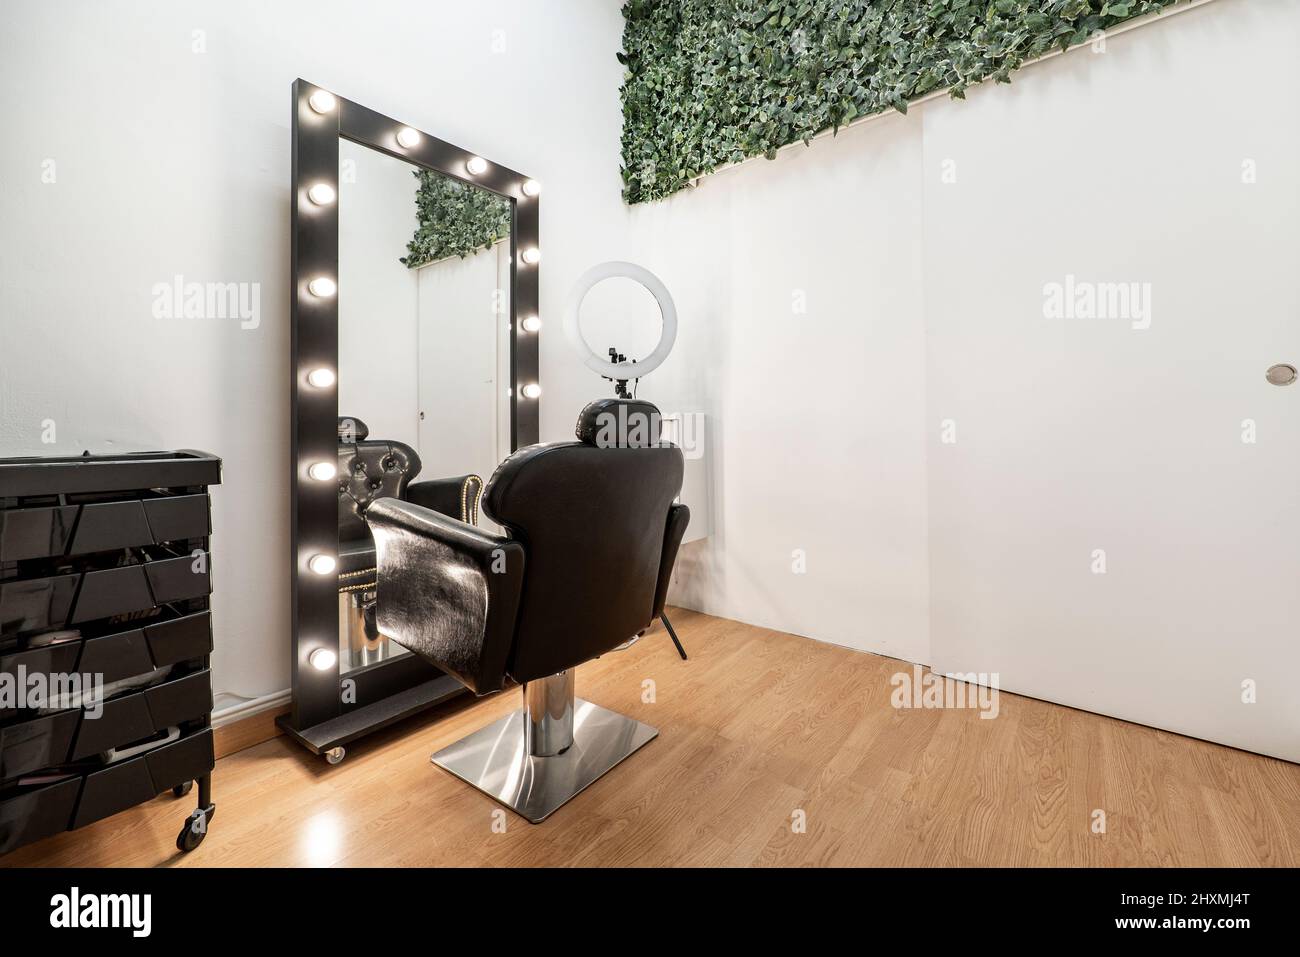 armchair in front of a mirror to make up and apply beauty treatments Stock Photo